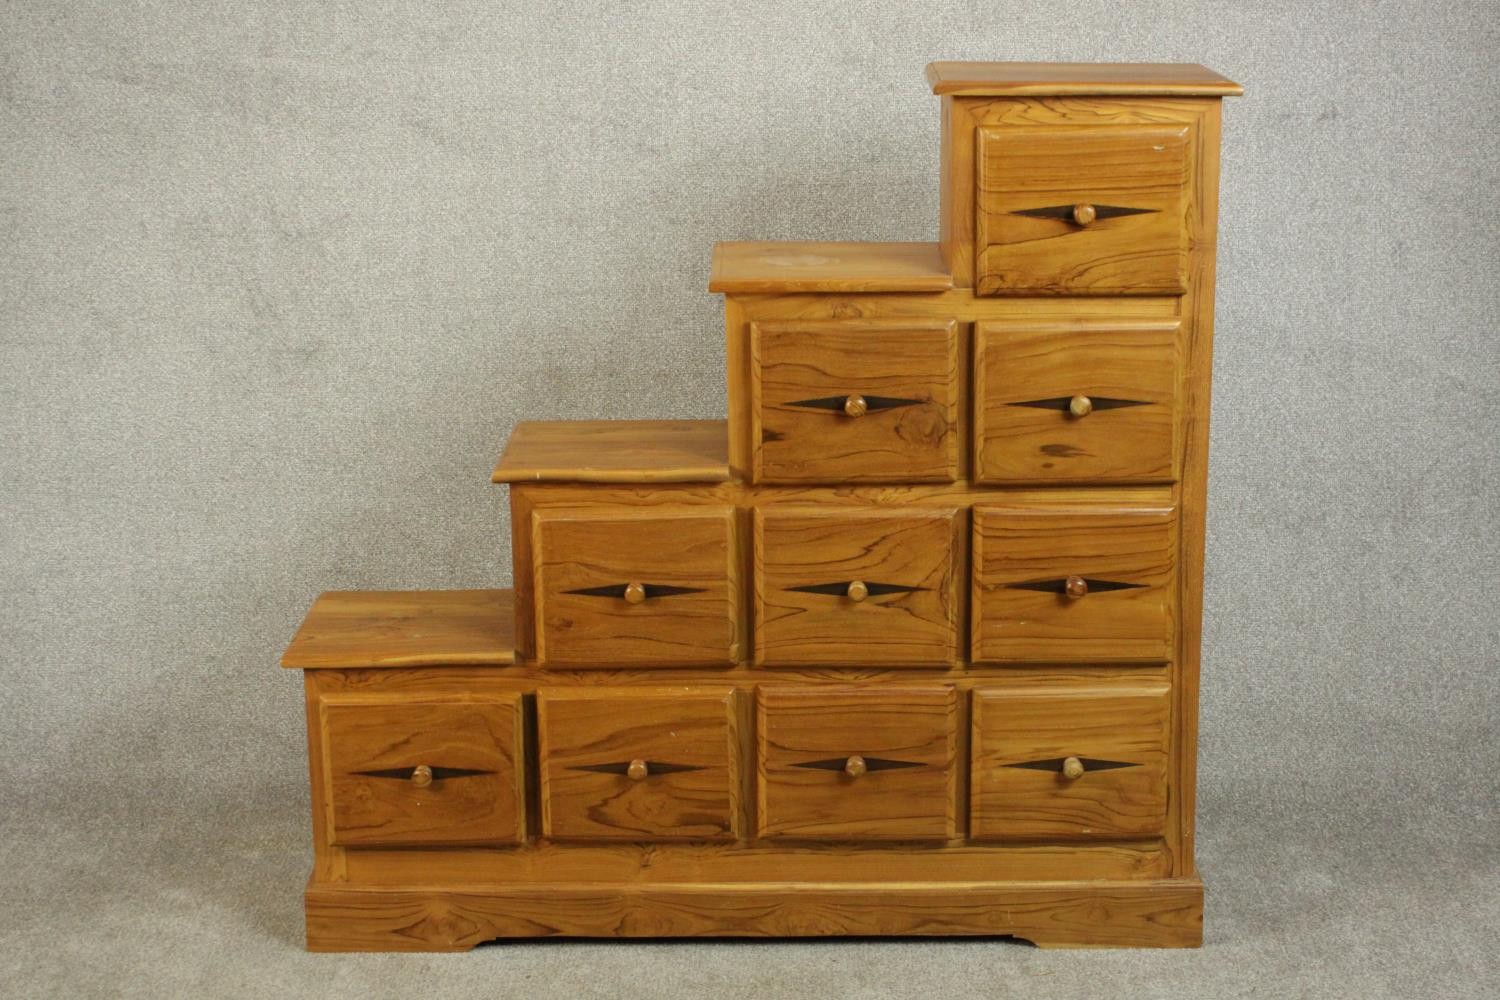 A contemporary pine stepped chest in the style of a Japanese kaidan tansu, with an arrangement of